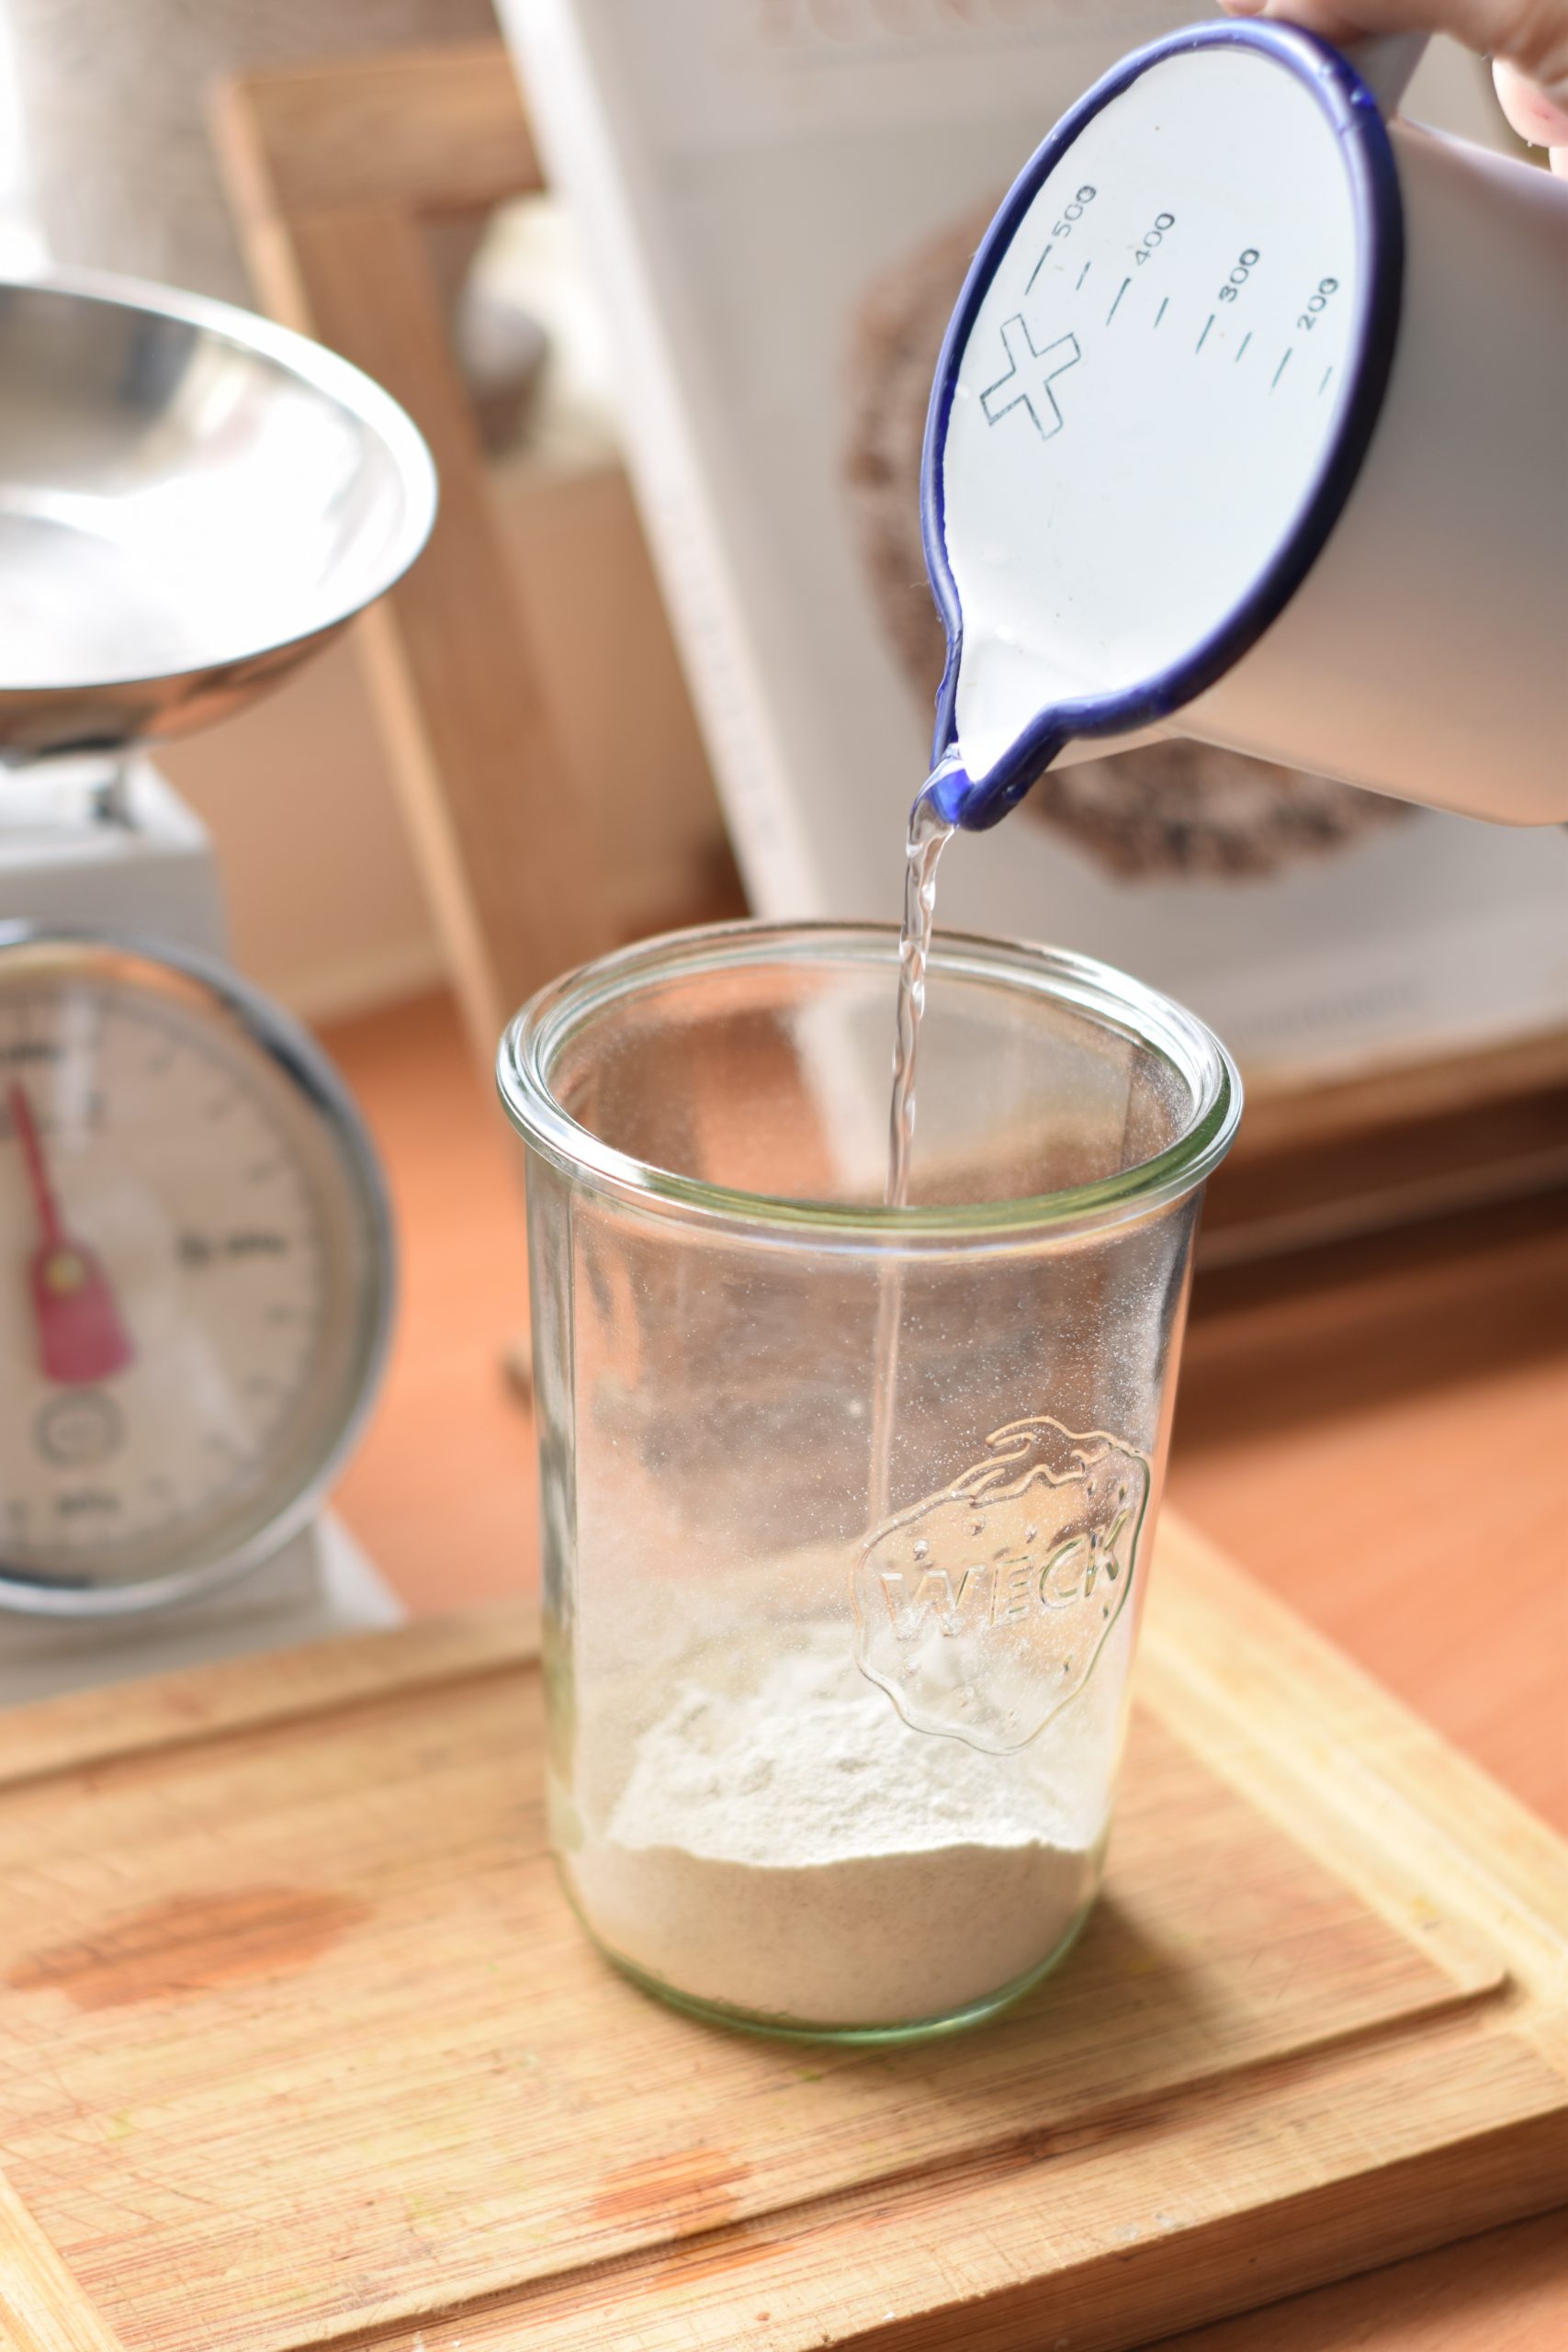 Pouring of water from an enamel measuring cup into sourdough starter in a glass jar